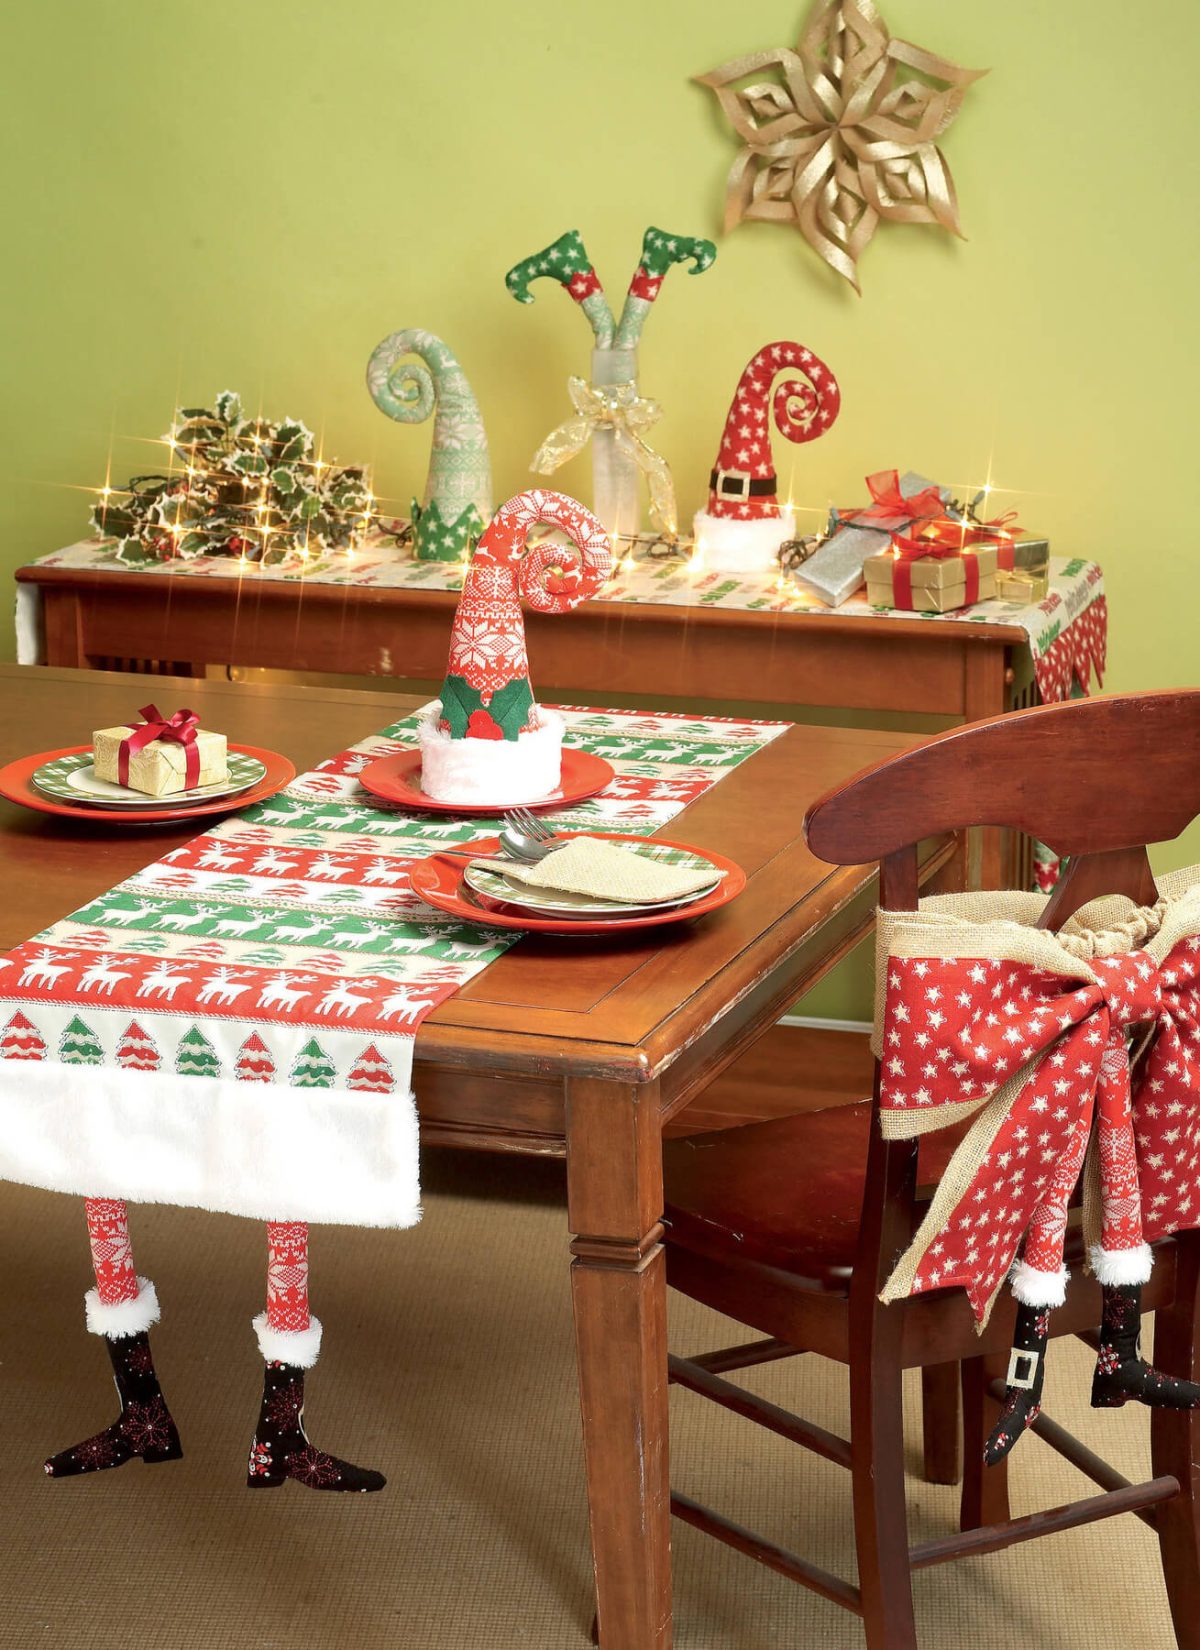 McCall's Sewing Pattern Christmas Table Runners and Decorations